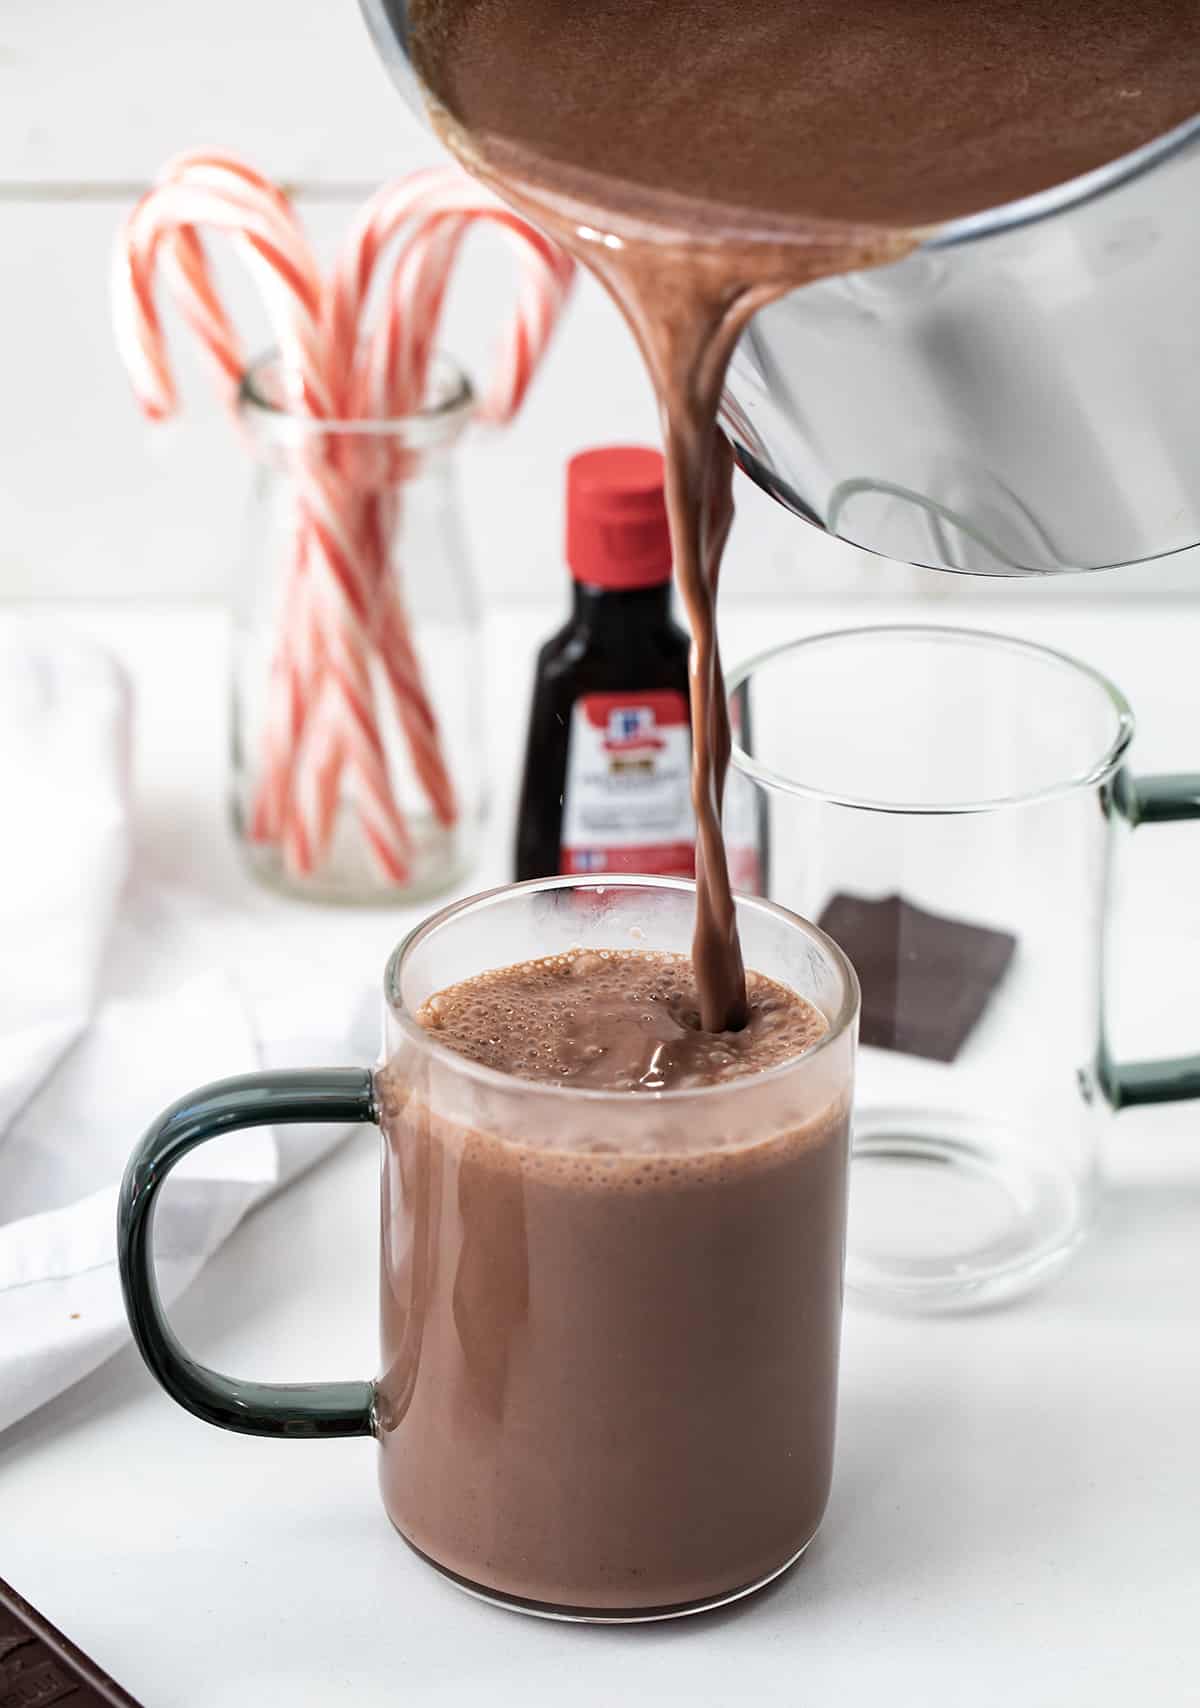 Pouring Peppermint Hot Chocolate into a Glass.